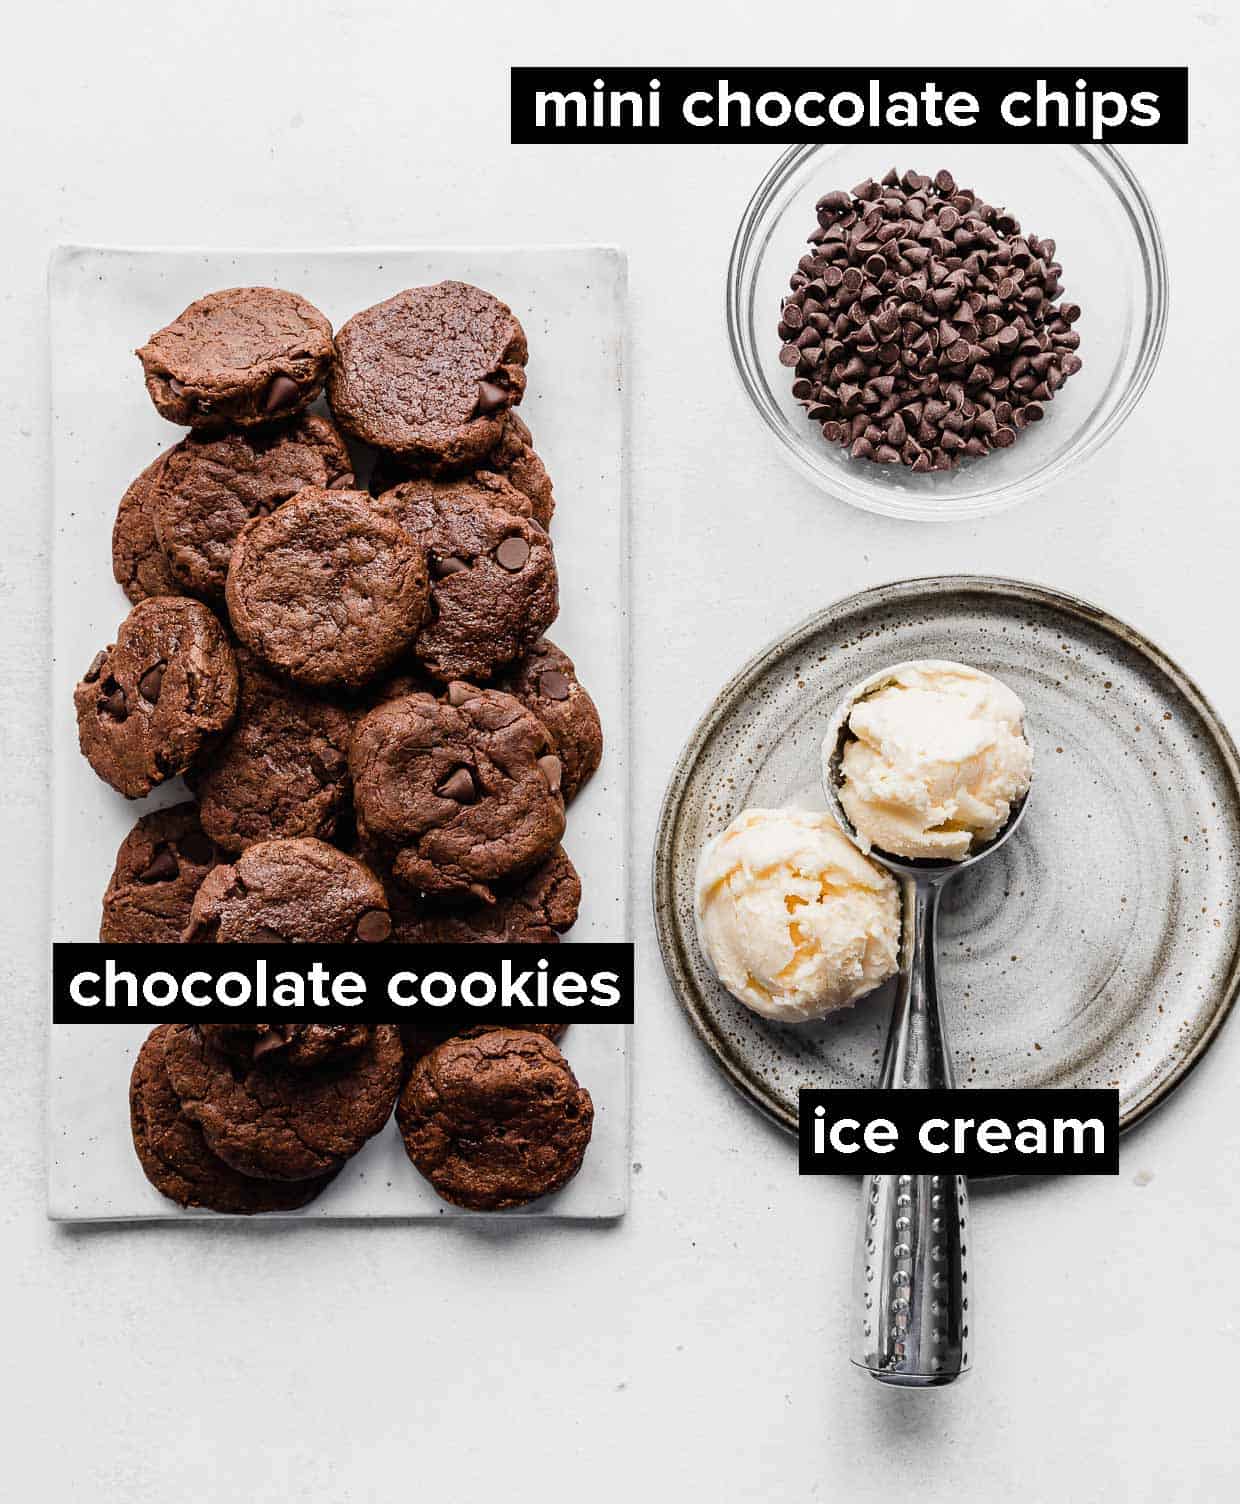 Ingredients used to make chocolate cookie ice cream sandwiches.